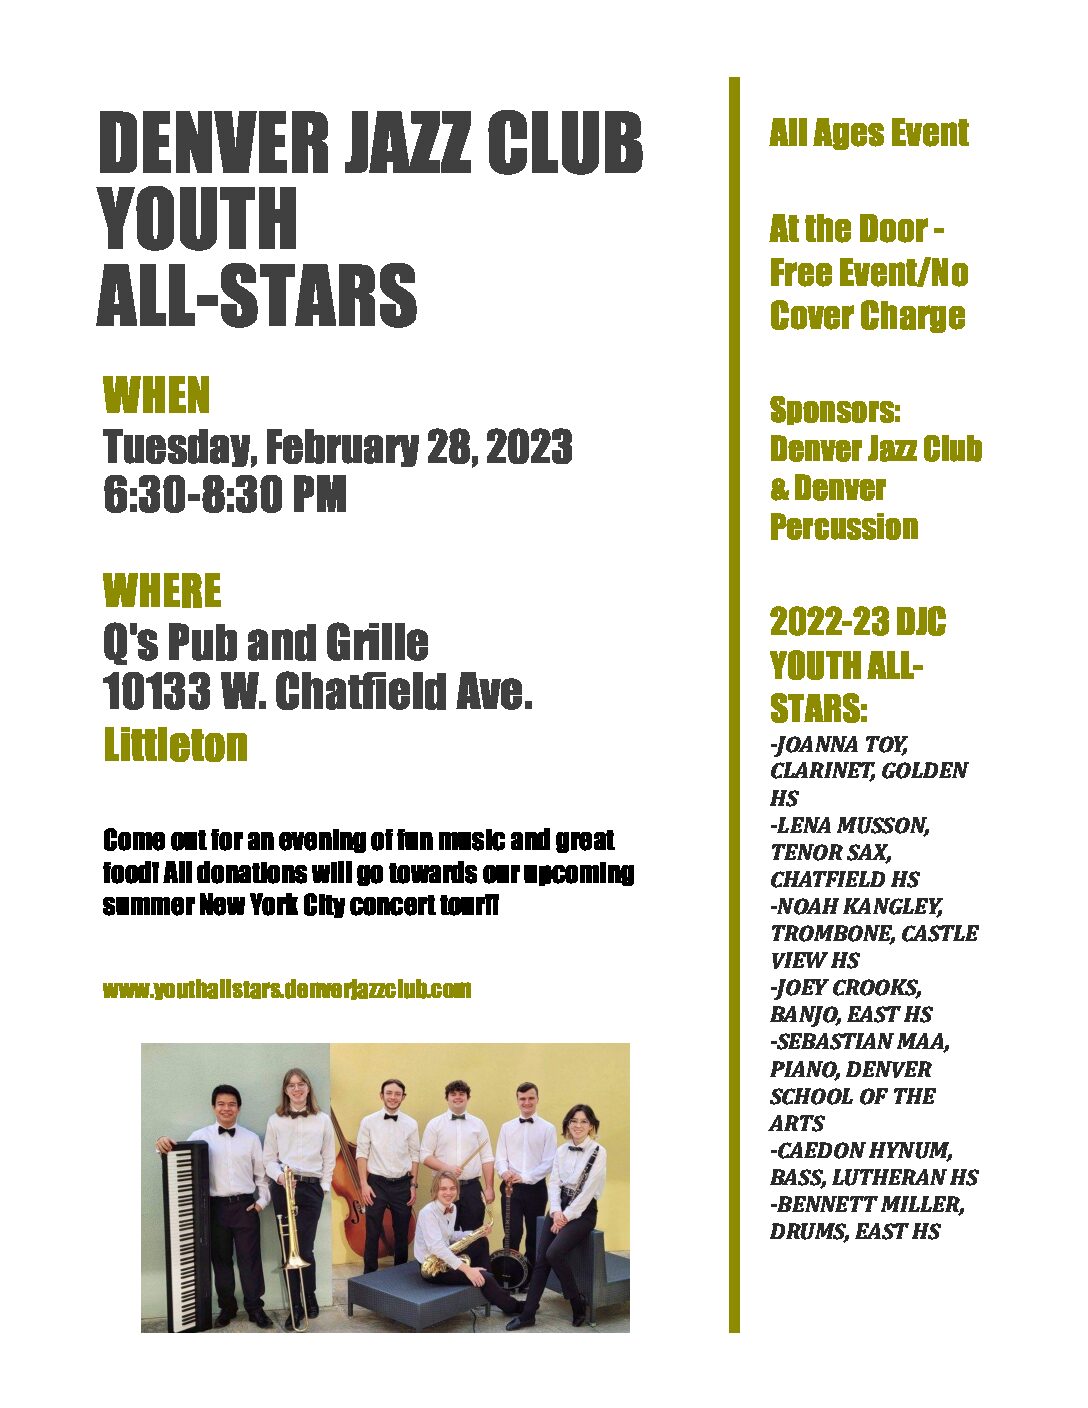 Q’s Pub and Grille to Feature the Denver Jazz Club Youth All-Stars on Tuesday, February 28th (6:30-8:30pm)